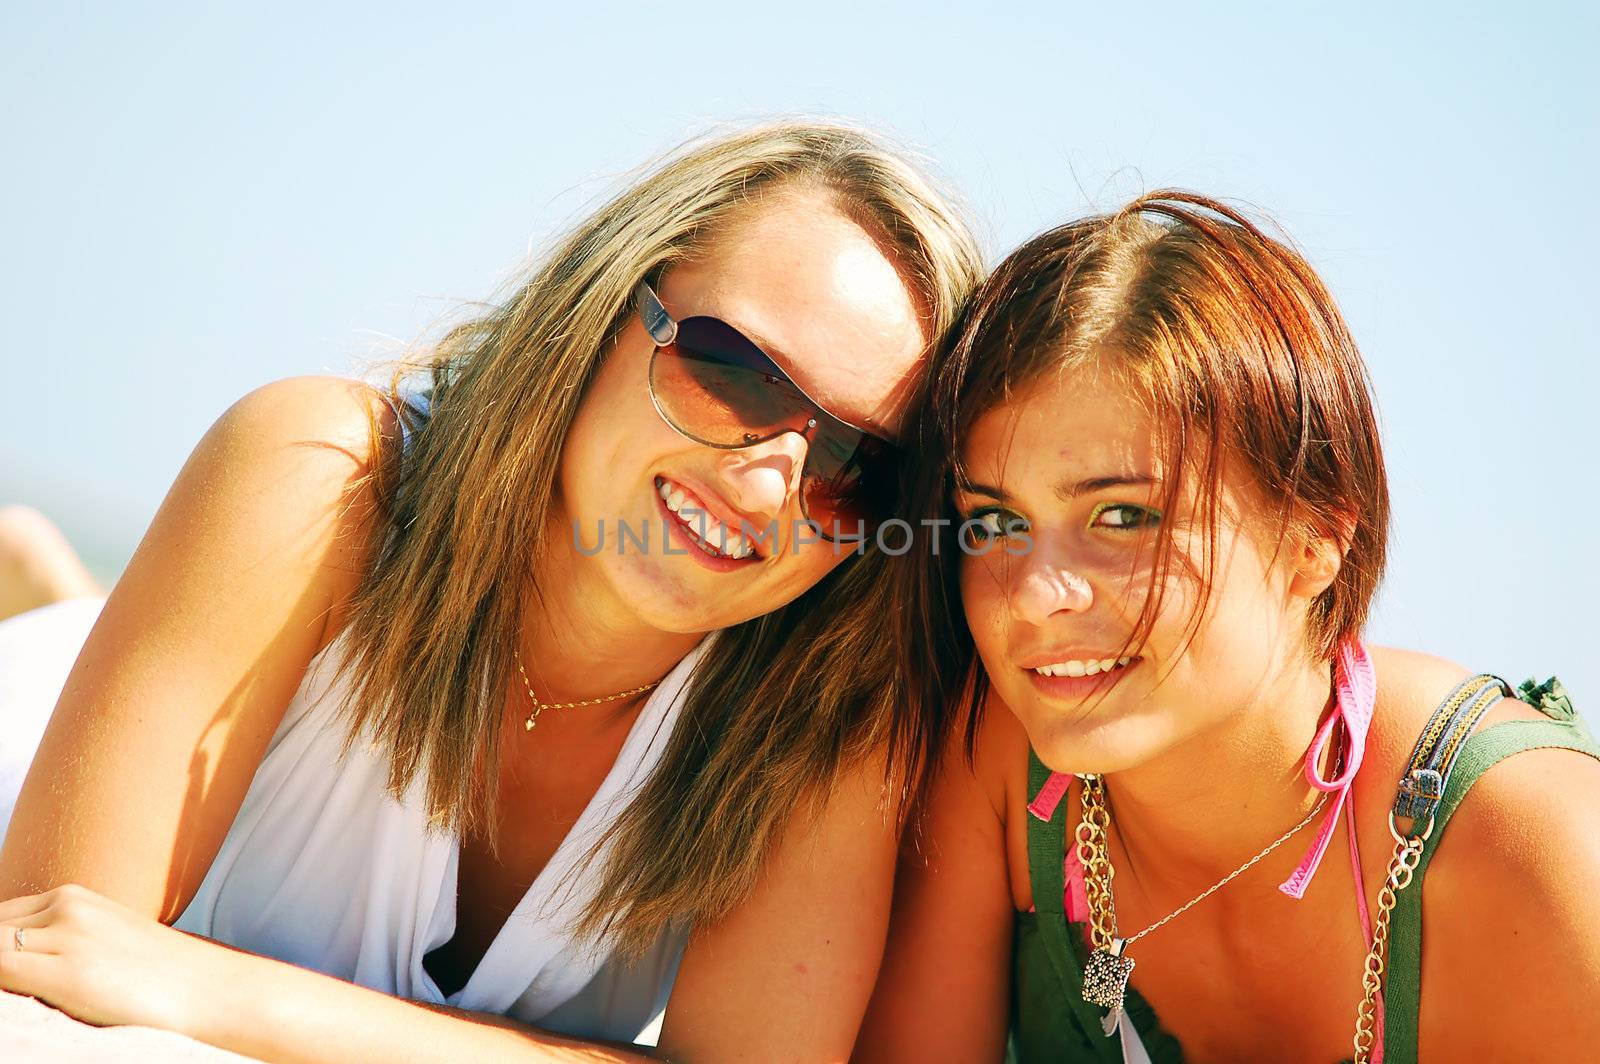 Young attractive girls enjoying together the summer beach